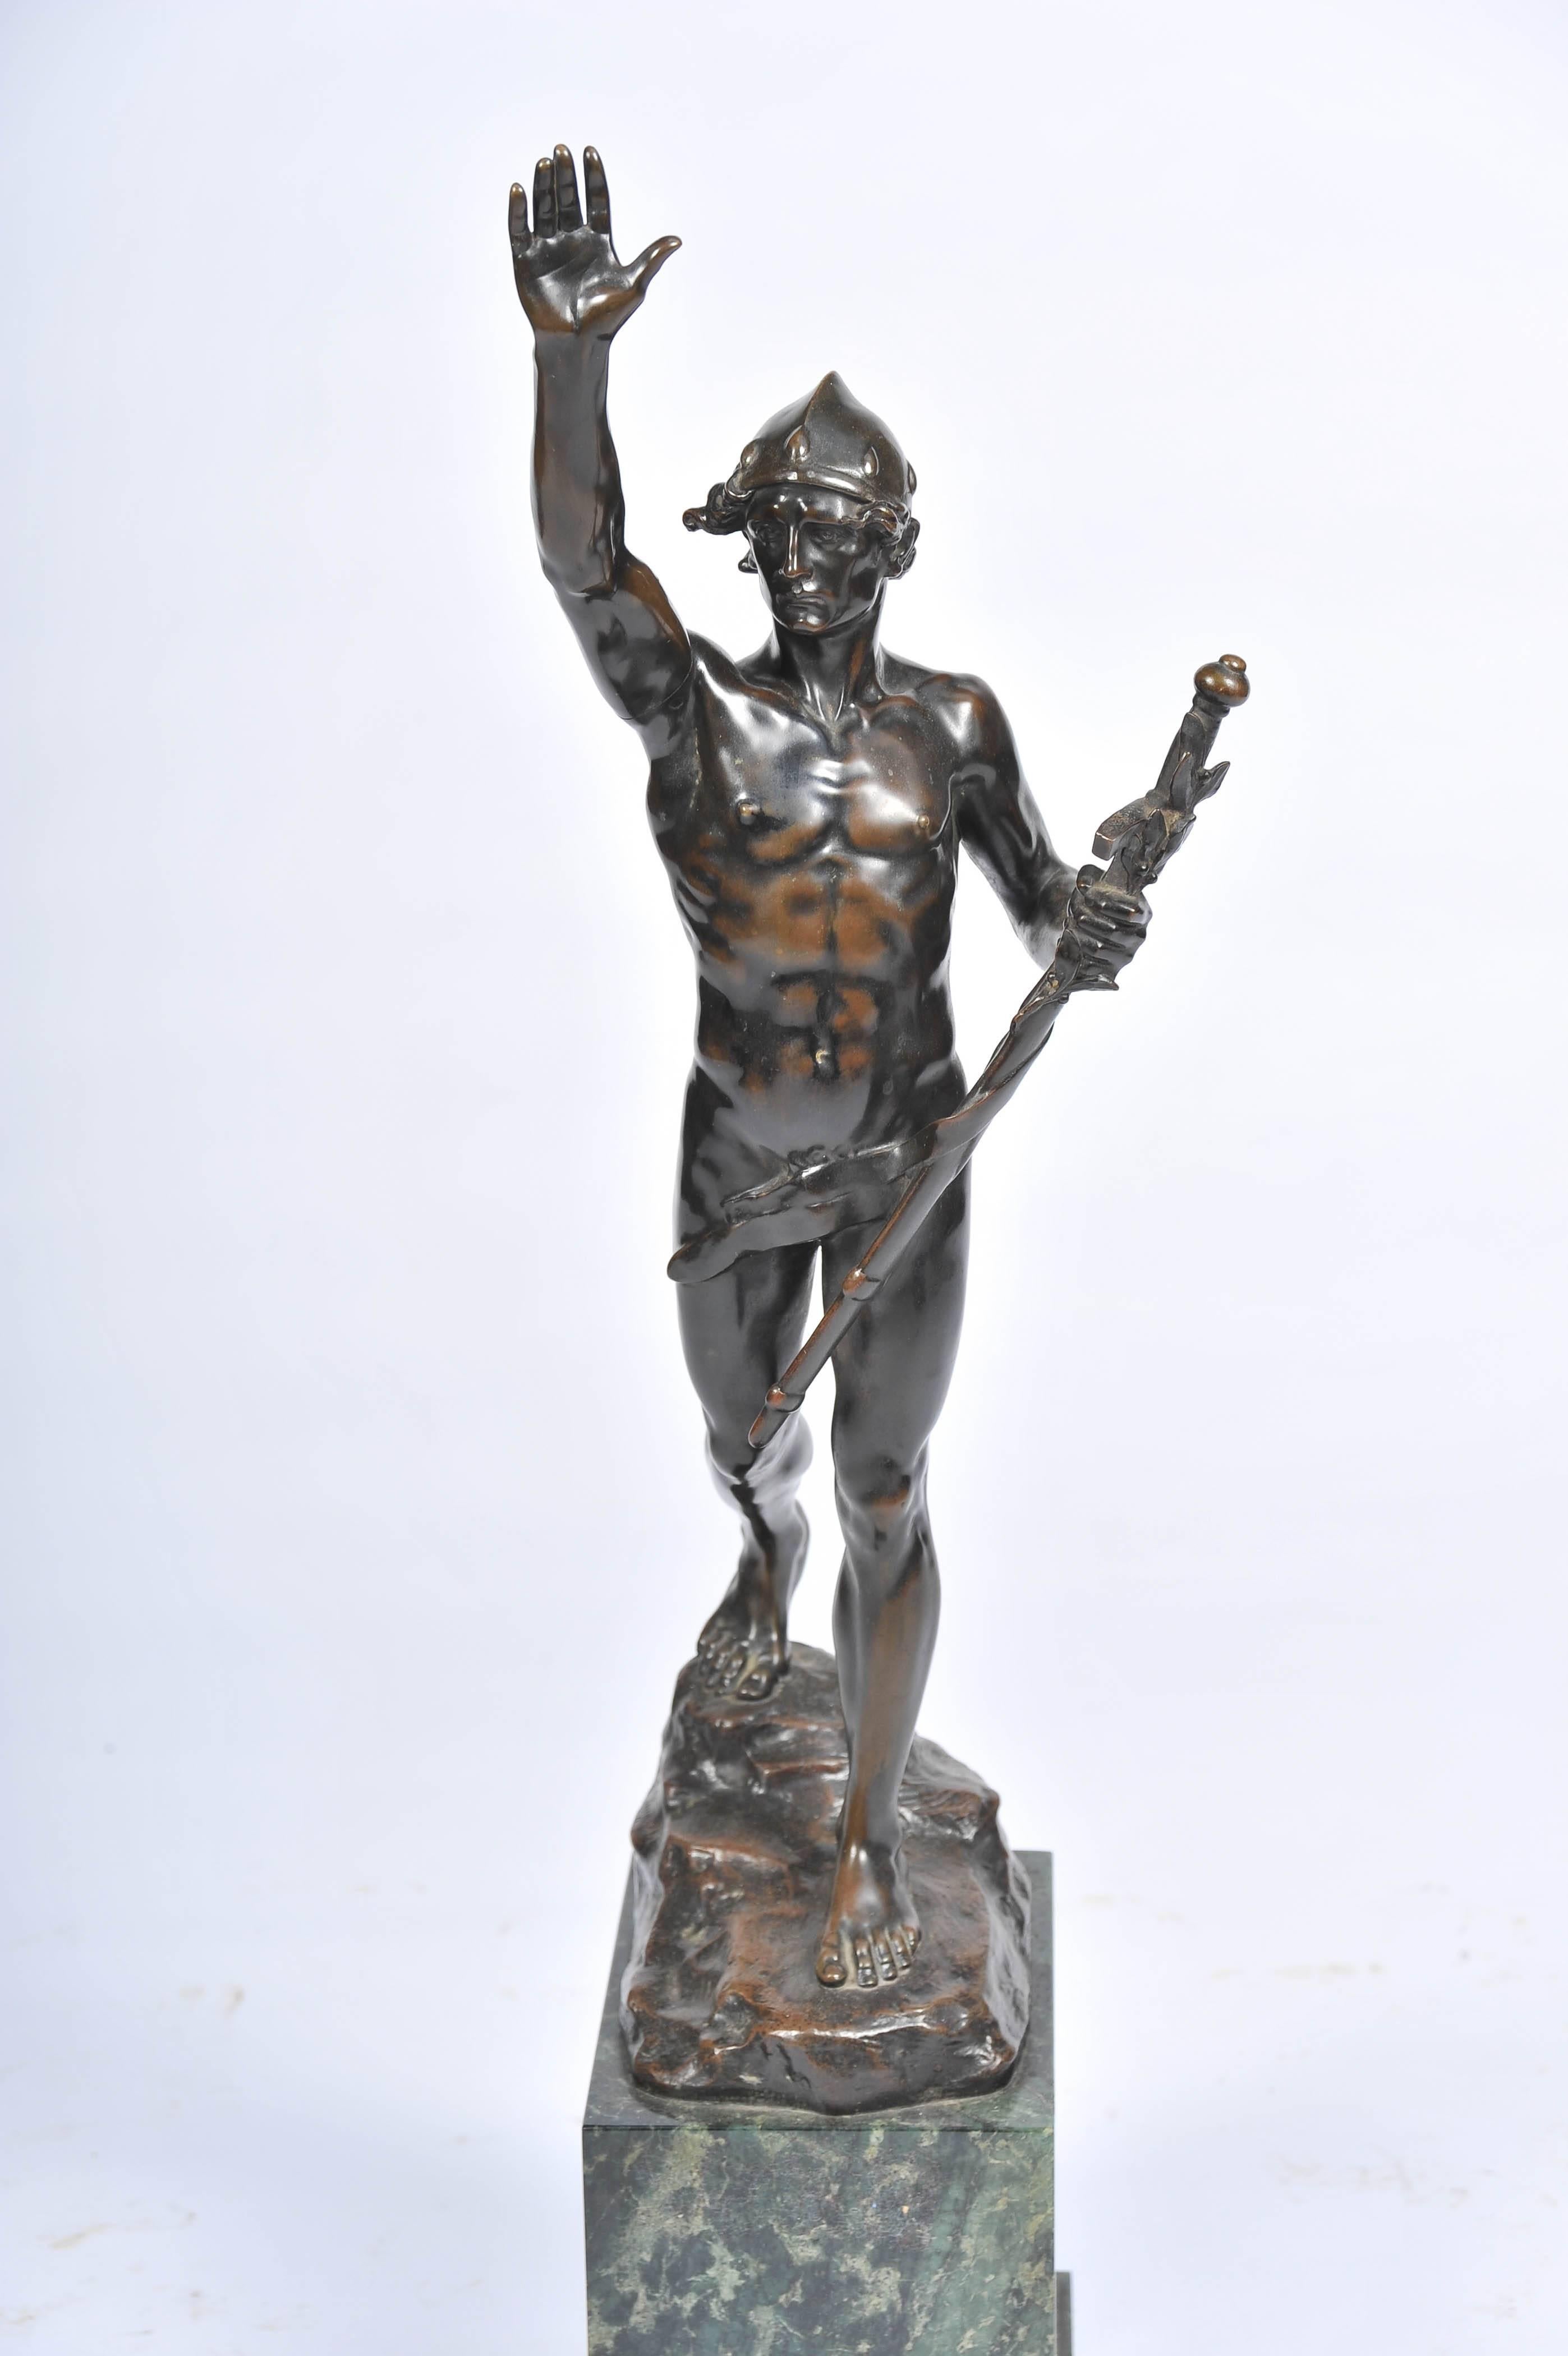 A very good quality 19th century bronze statue of David standing on a rock and mounted on a marble plinth.
Signed; Fernand Lugerth 1885-1915.